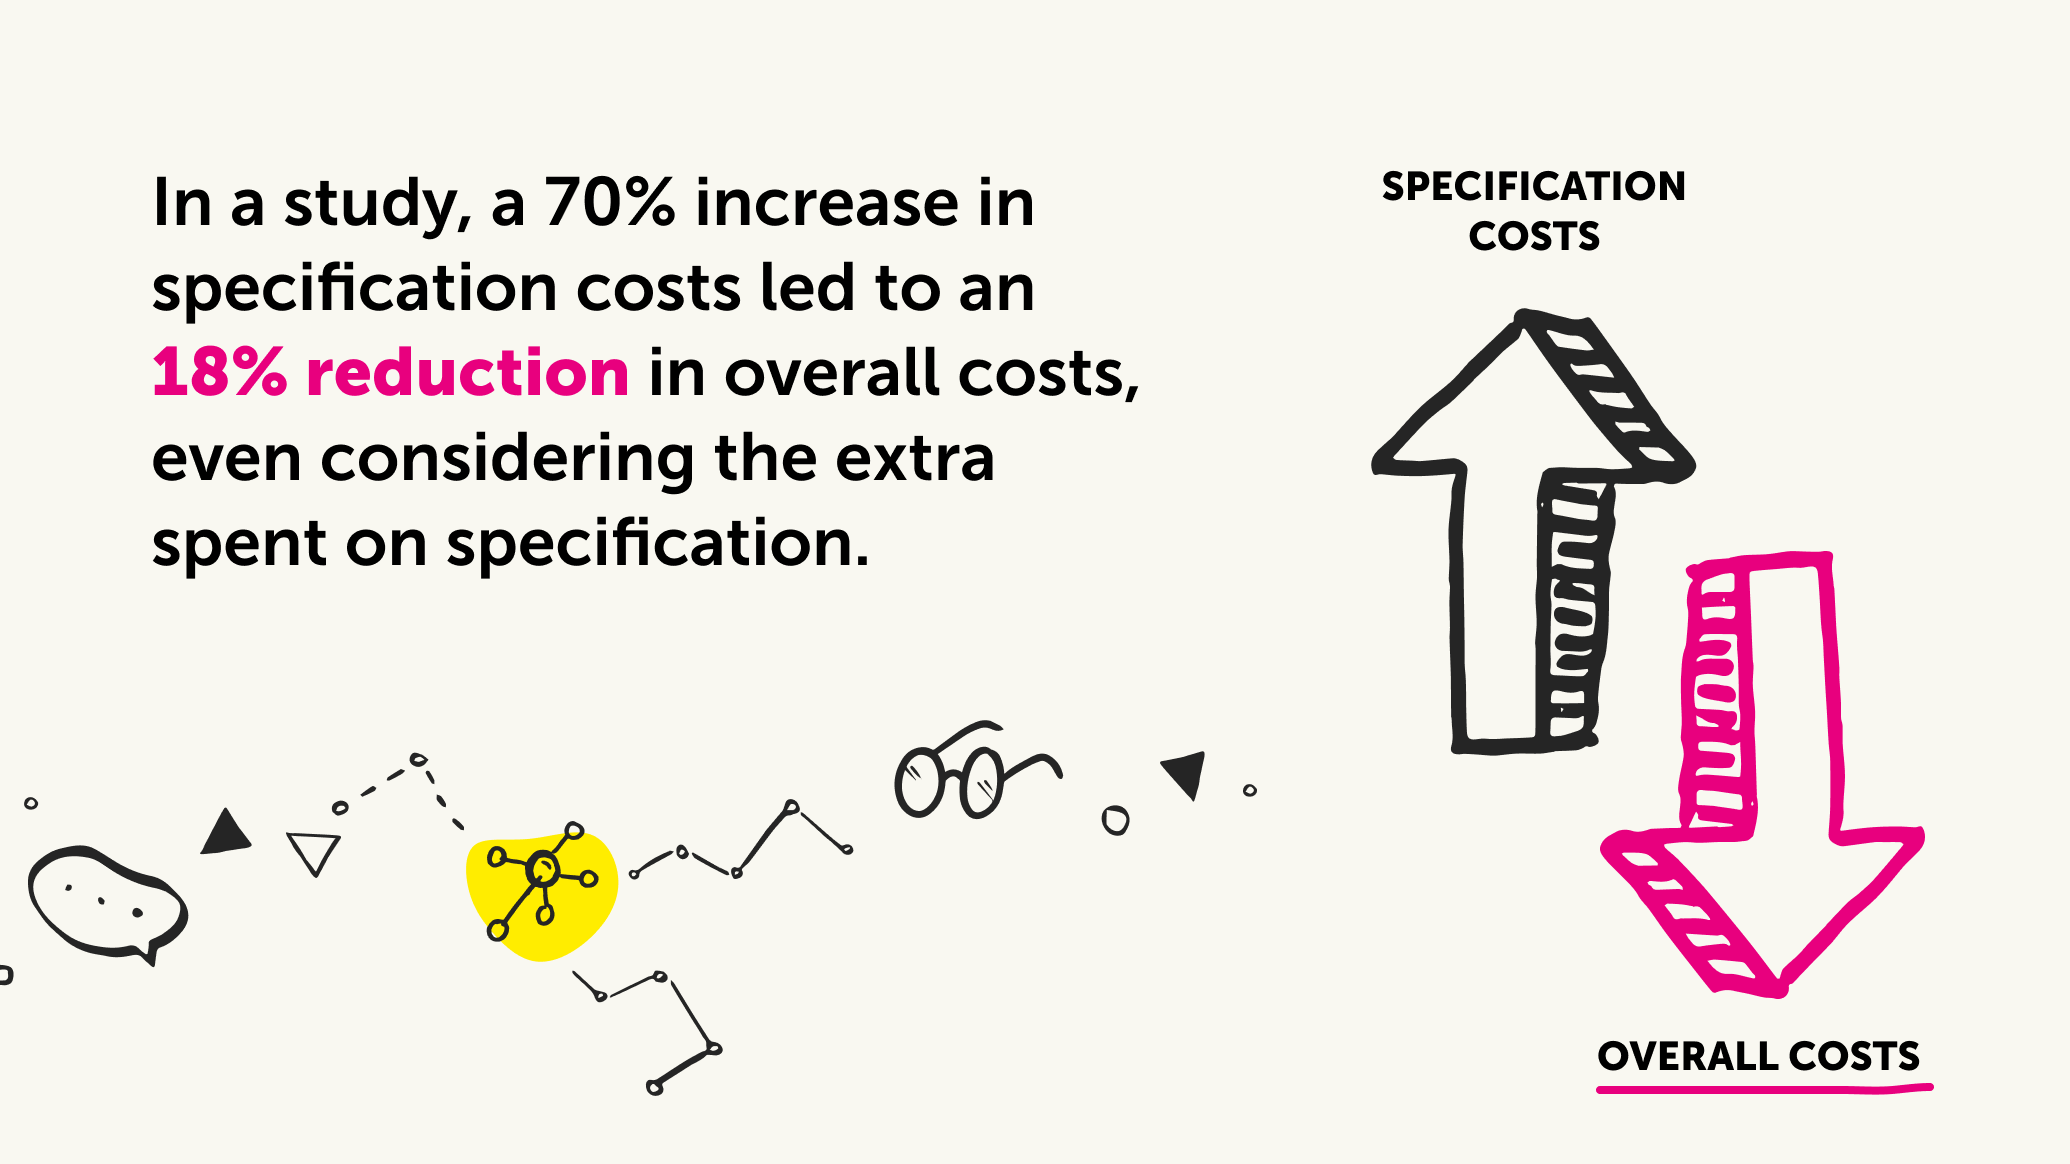 Body image explaining a study conducted on specification costs – more info given in blog